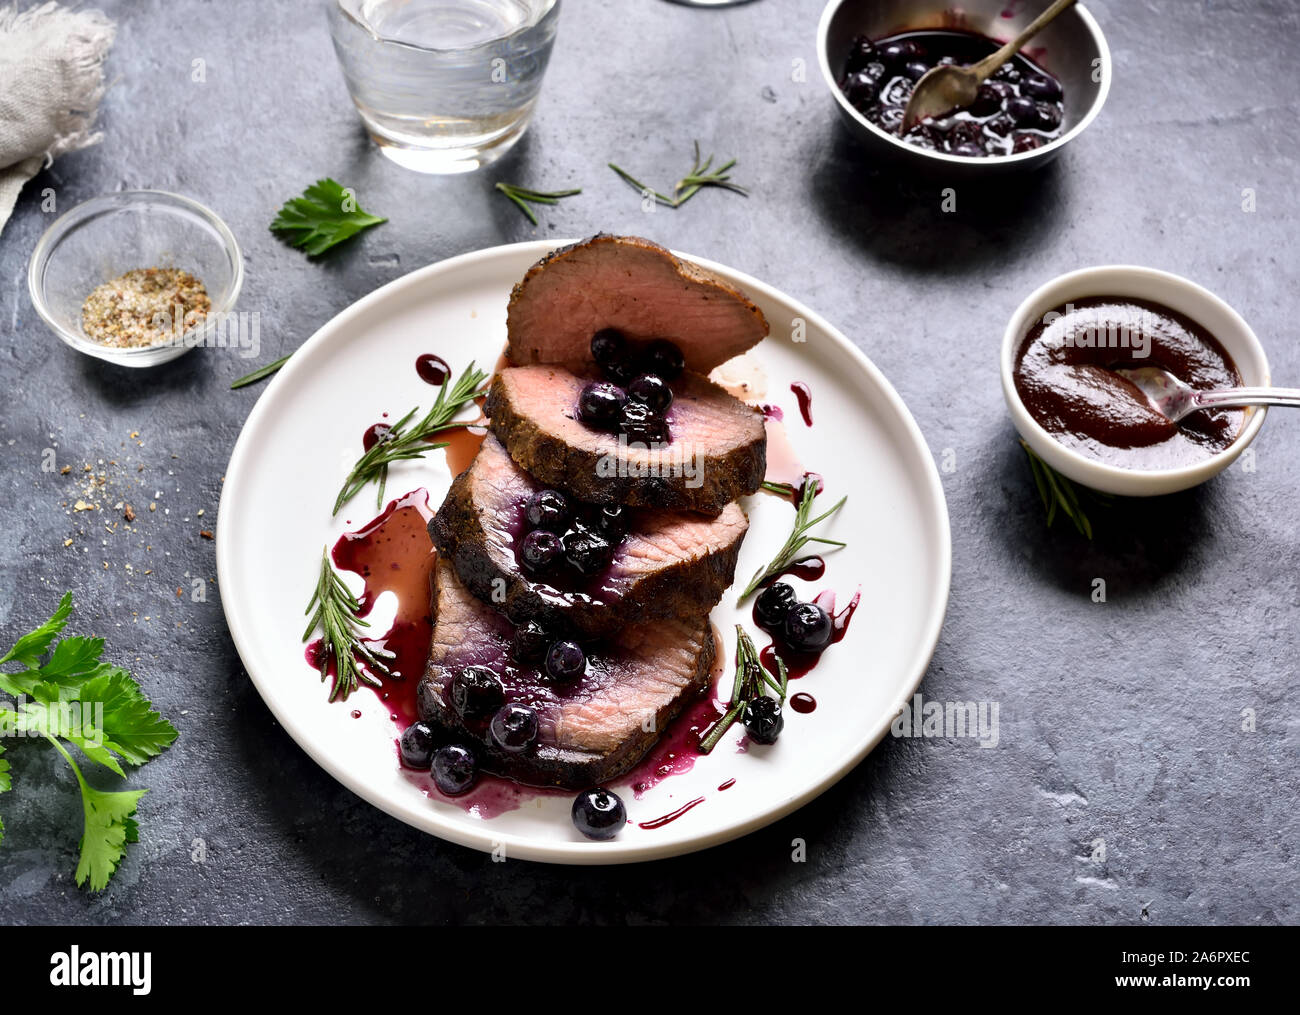 Tasty beef with blueberry sauce on white plate over blue stone background. Medium rare roast beef with berry sauce. Stock Photo